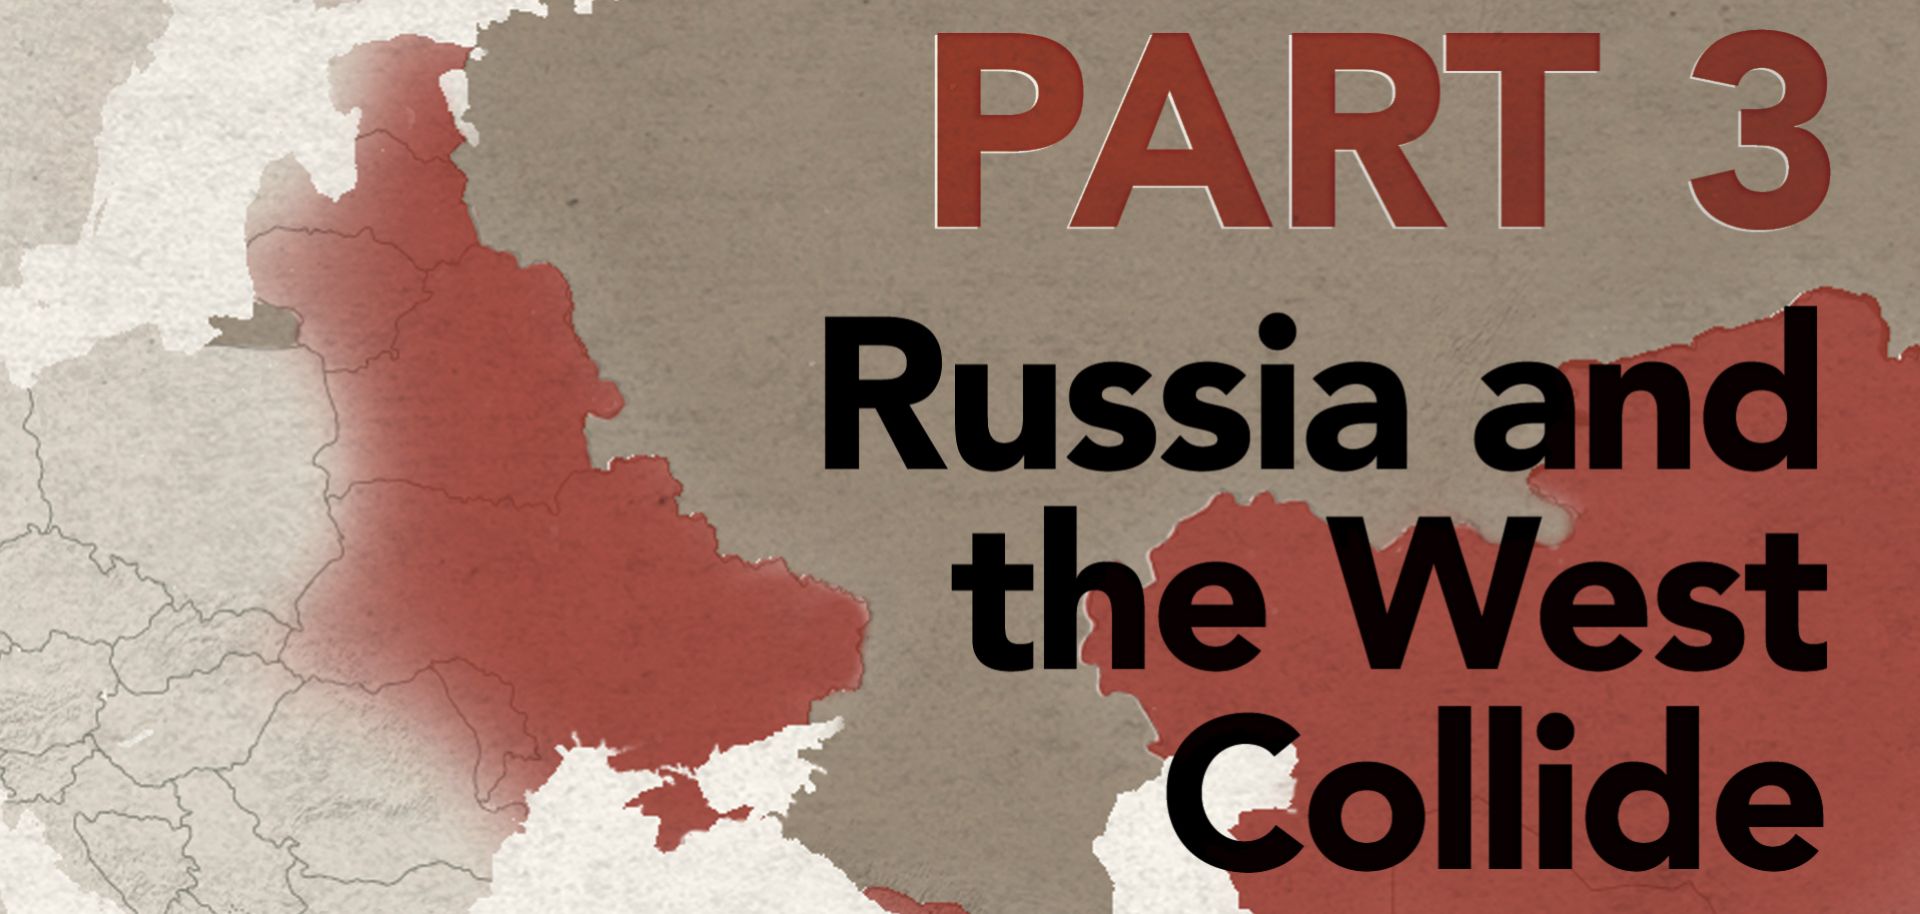 The competition between Russia and the West has been heavily concentrated in Ukraine throughout history. 